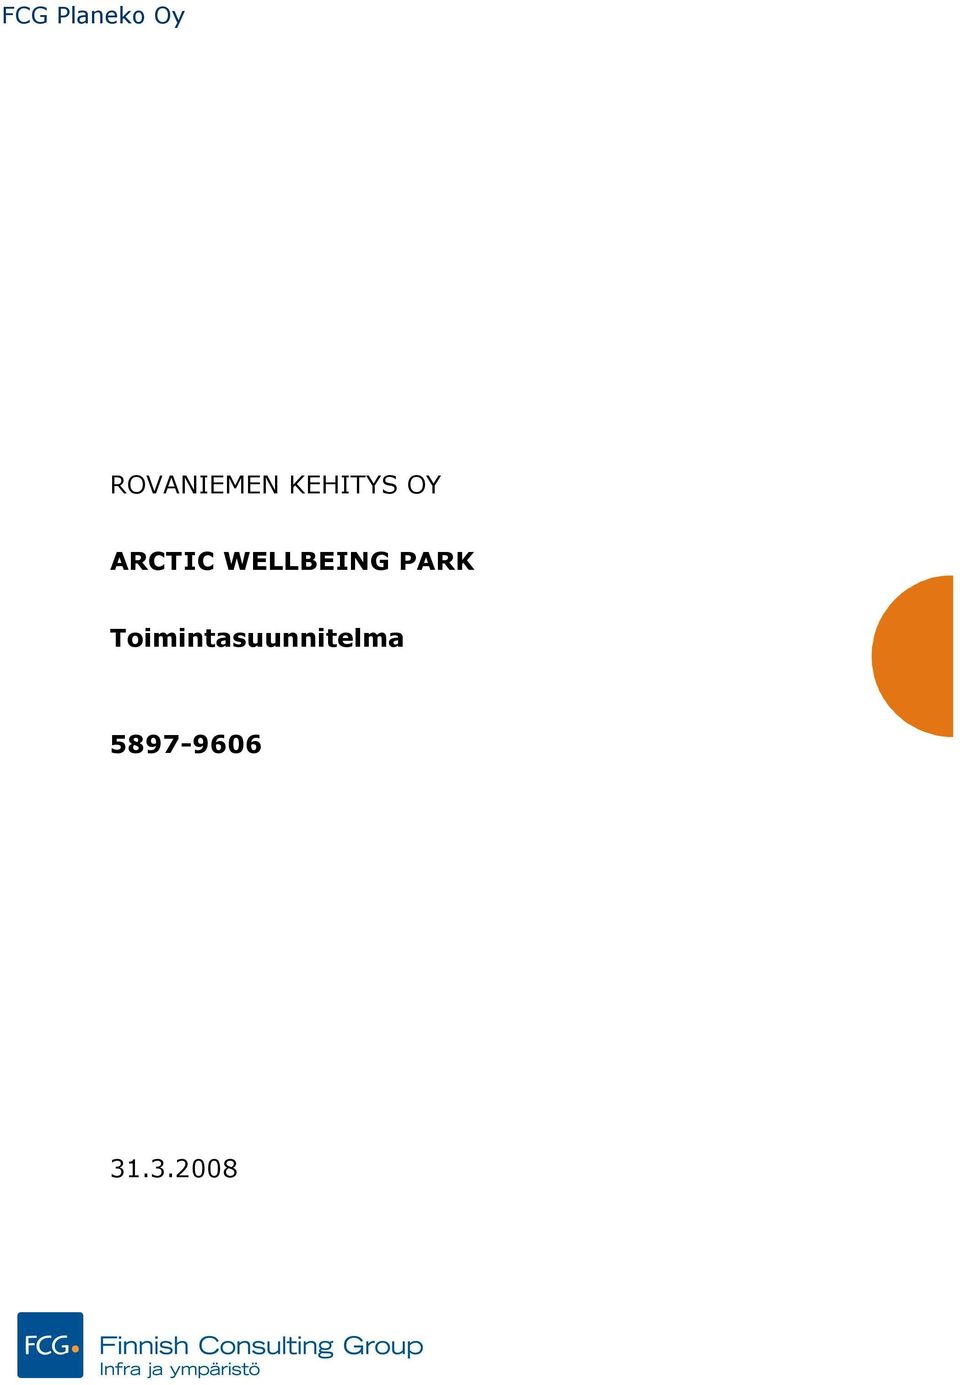 ARCTIC WELLBEING PARK